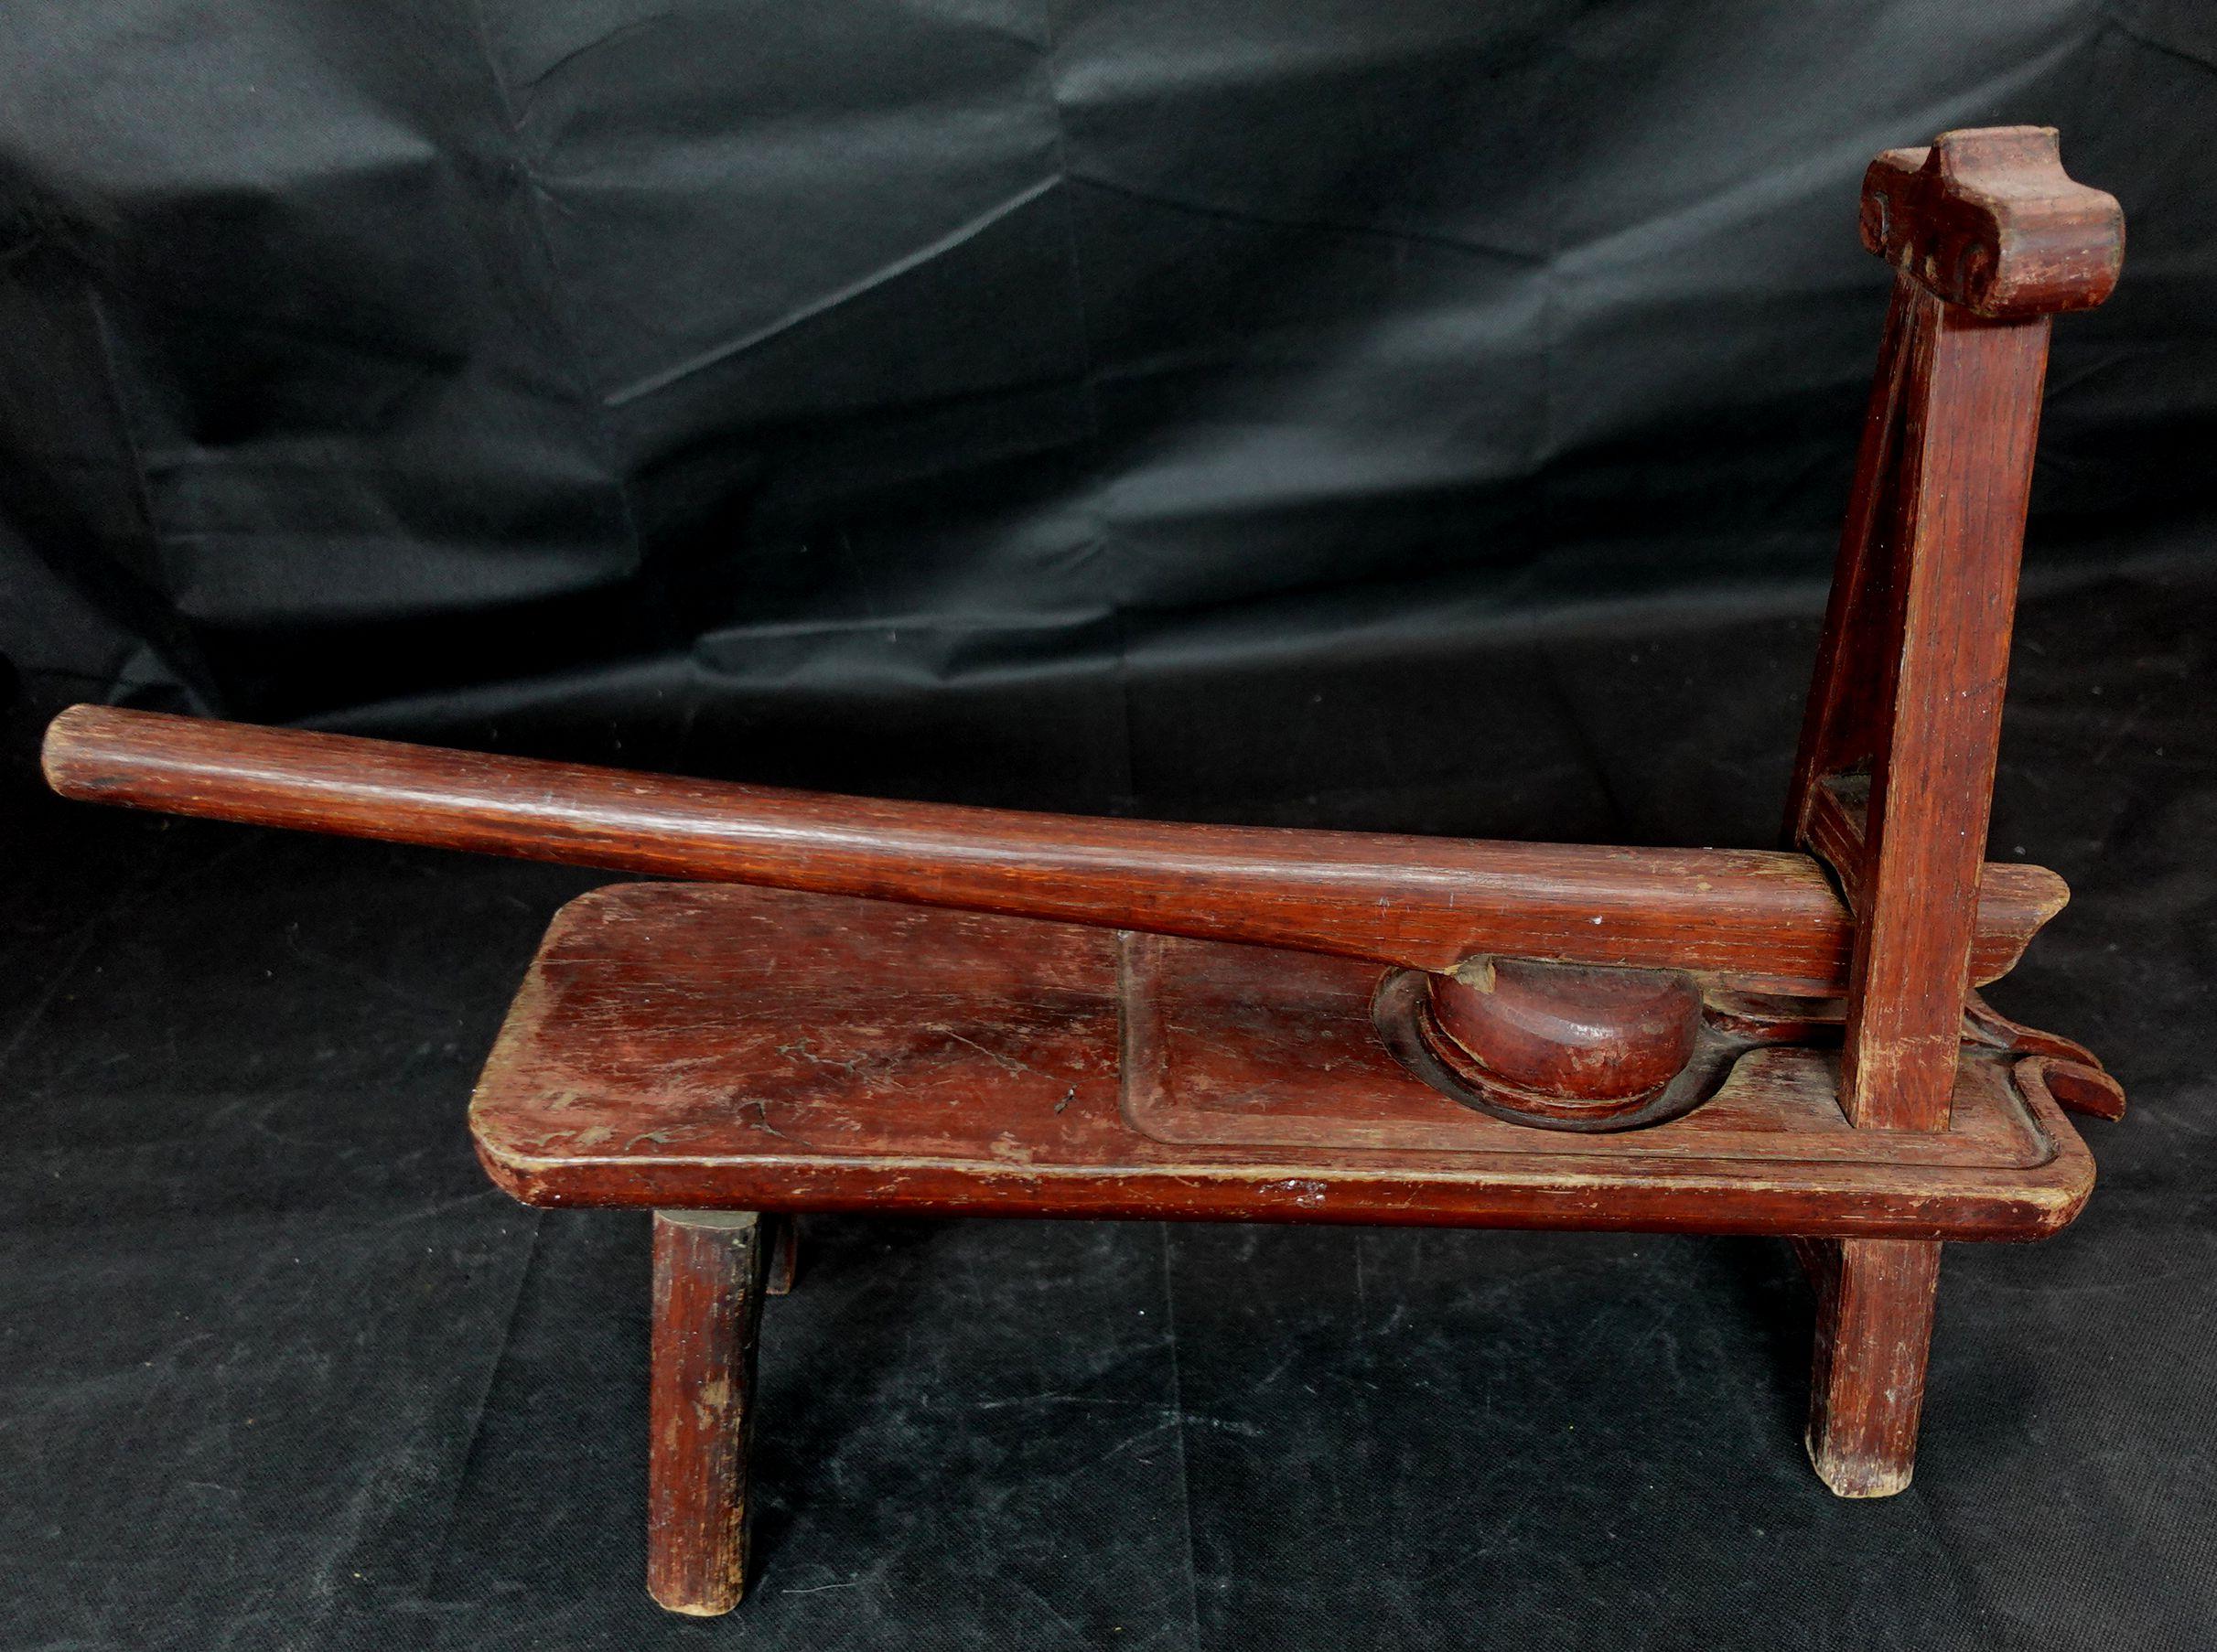 Japanese made entirely from wood, this antique was used mainly as a juicer for fruits. 
L:25in(63.5cm) H:16in(40.6cm).